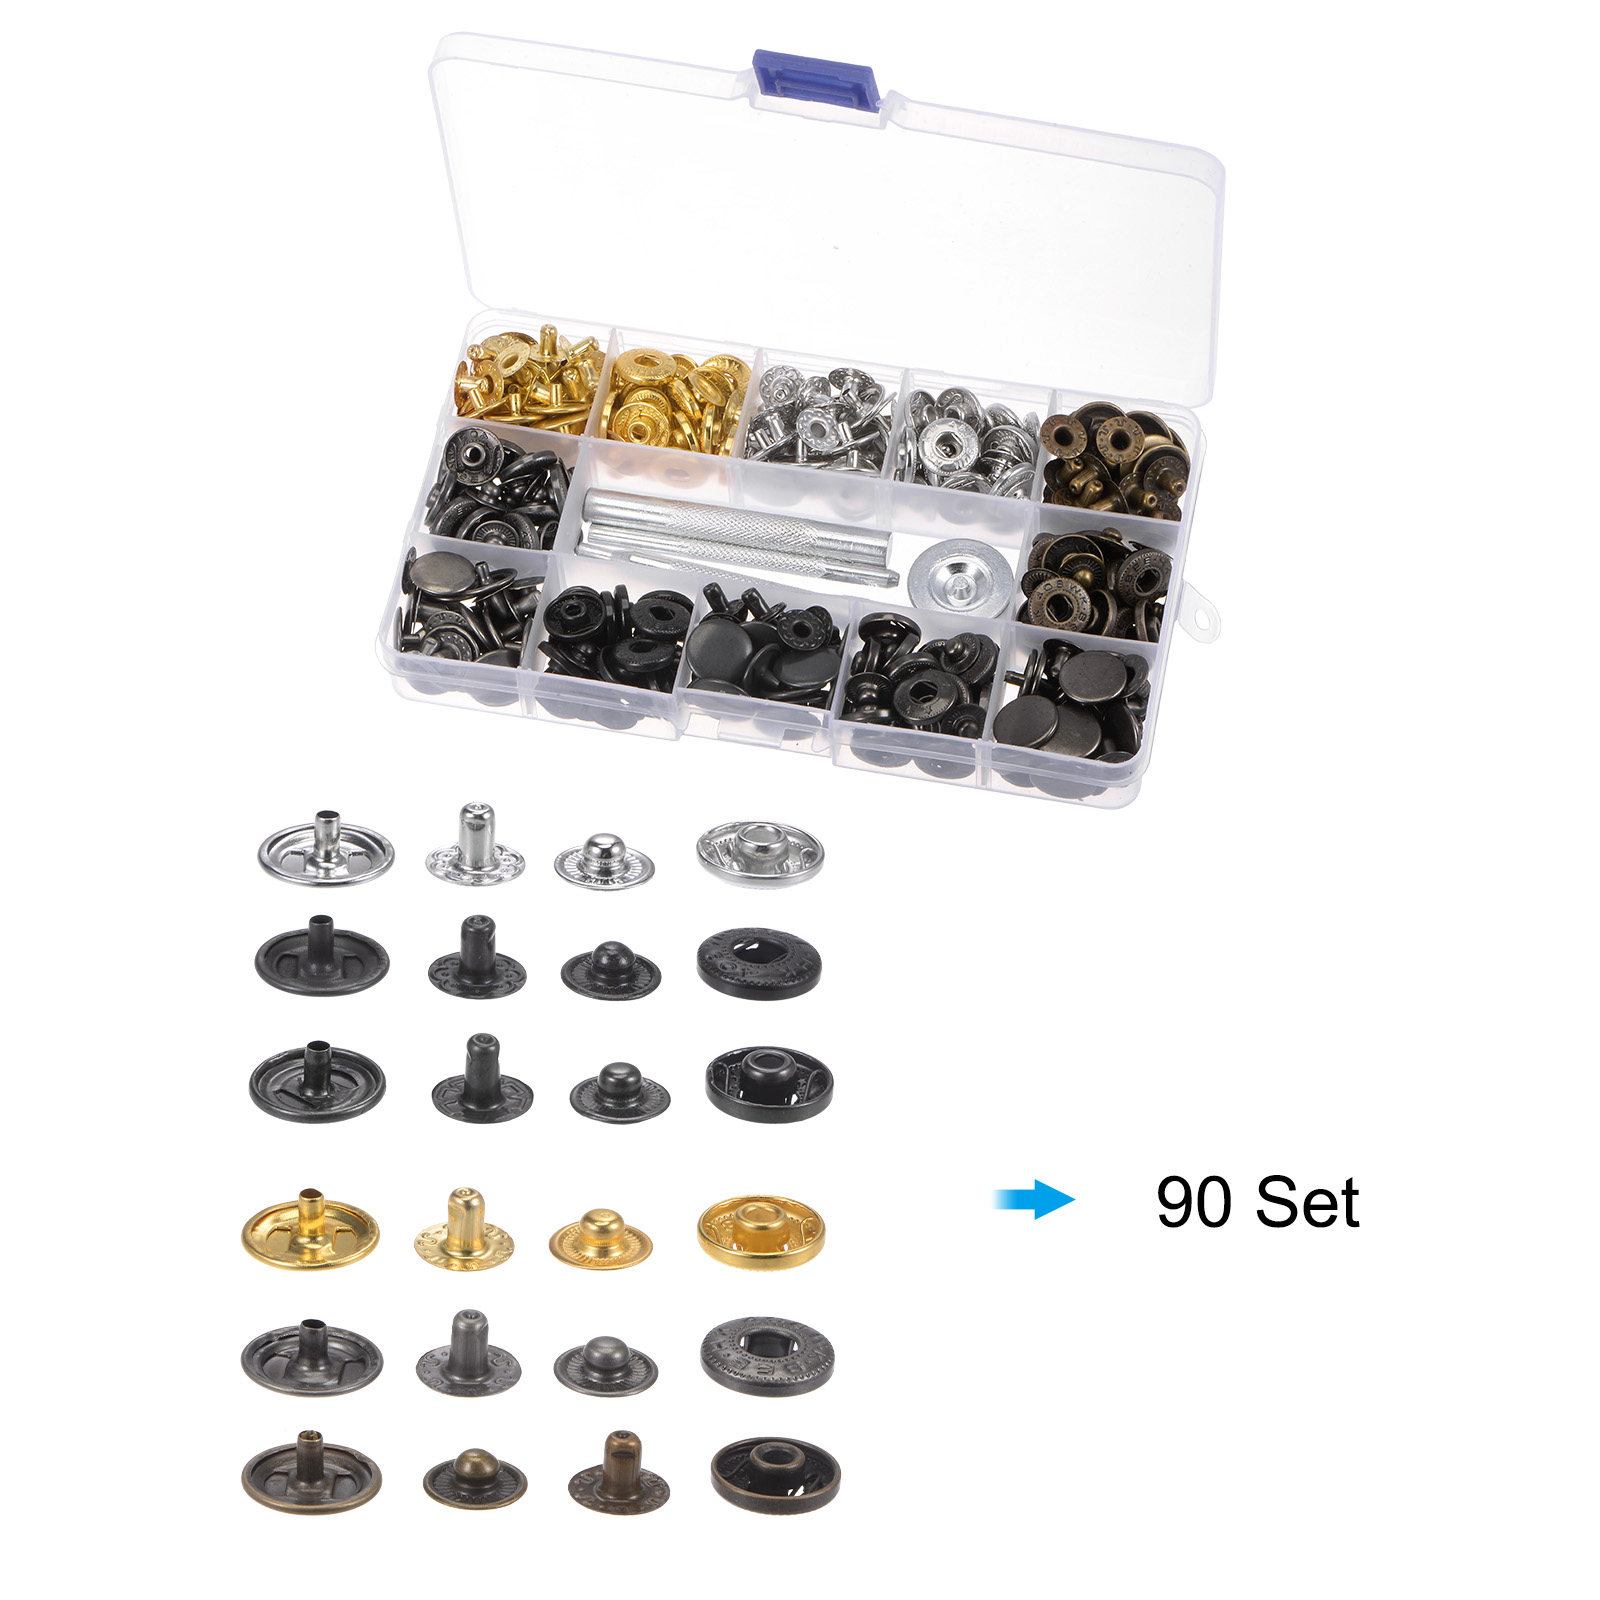 Unique Bargains 90 Sets Snap Fasteners Kit 15mm with 3 Setter Tools & Storage Box for Clothing